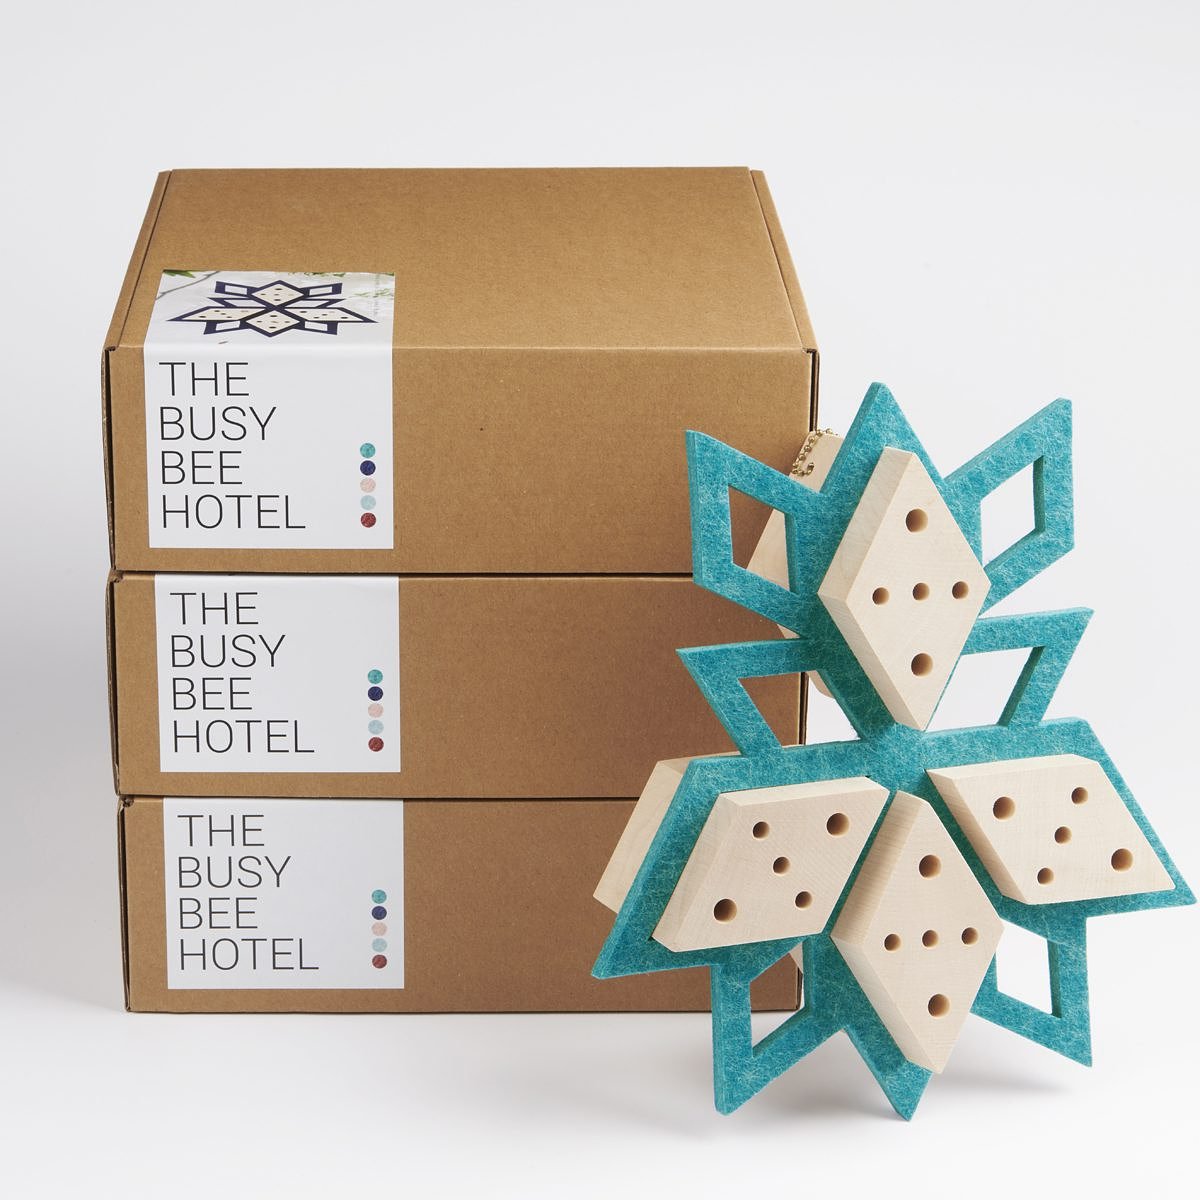 The busy bee hotel - Green blue